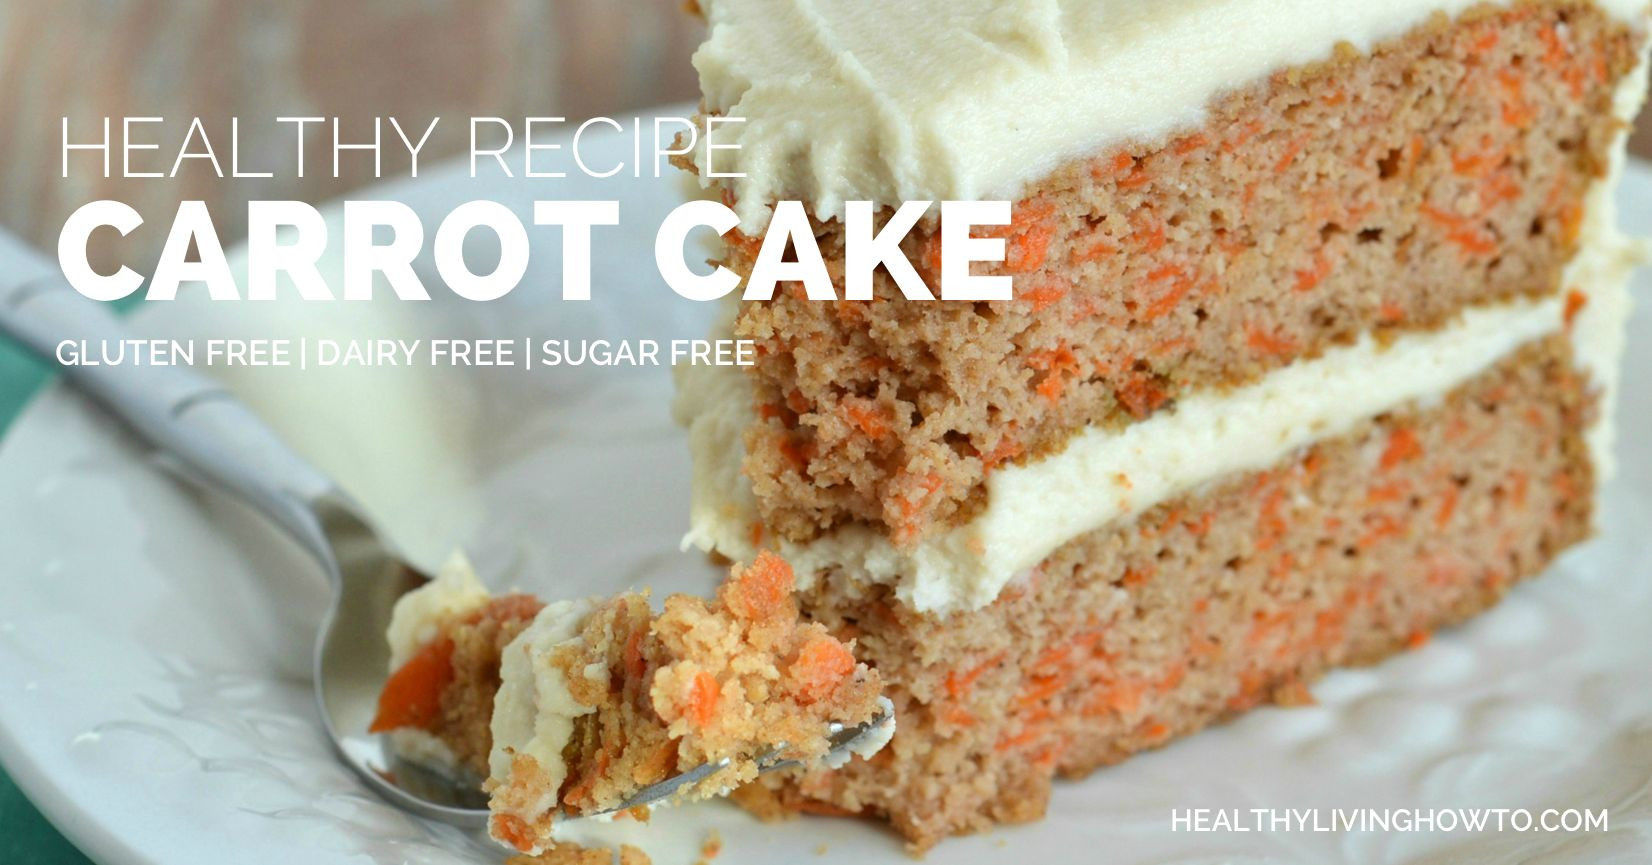 Healthy Cake Recipes
 Carrot Cake Healthy Living How To